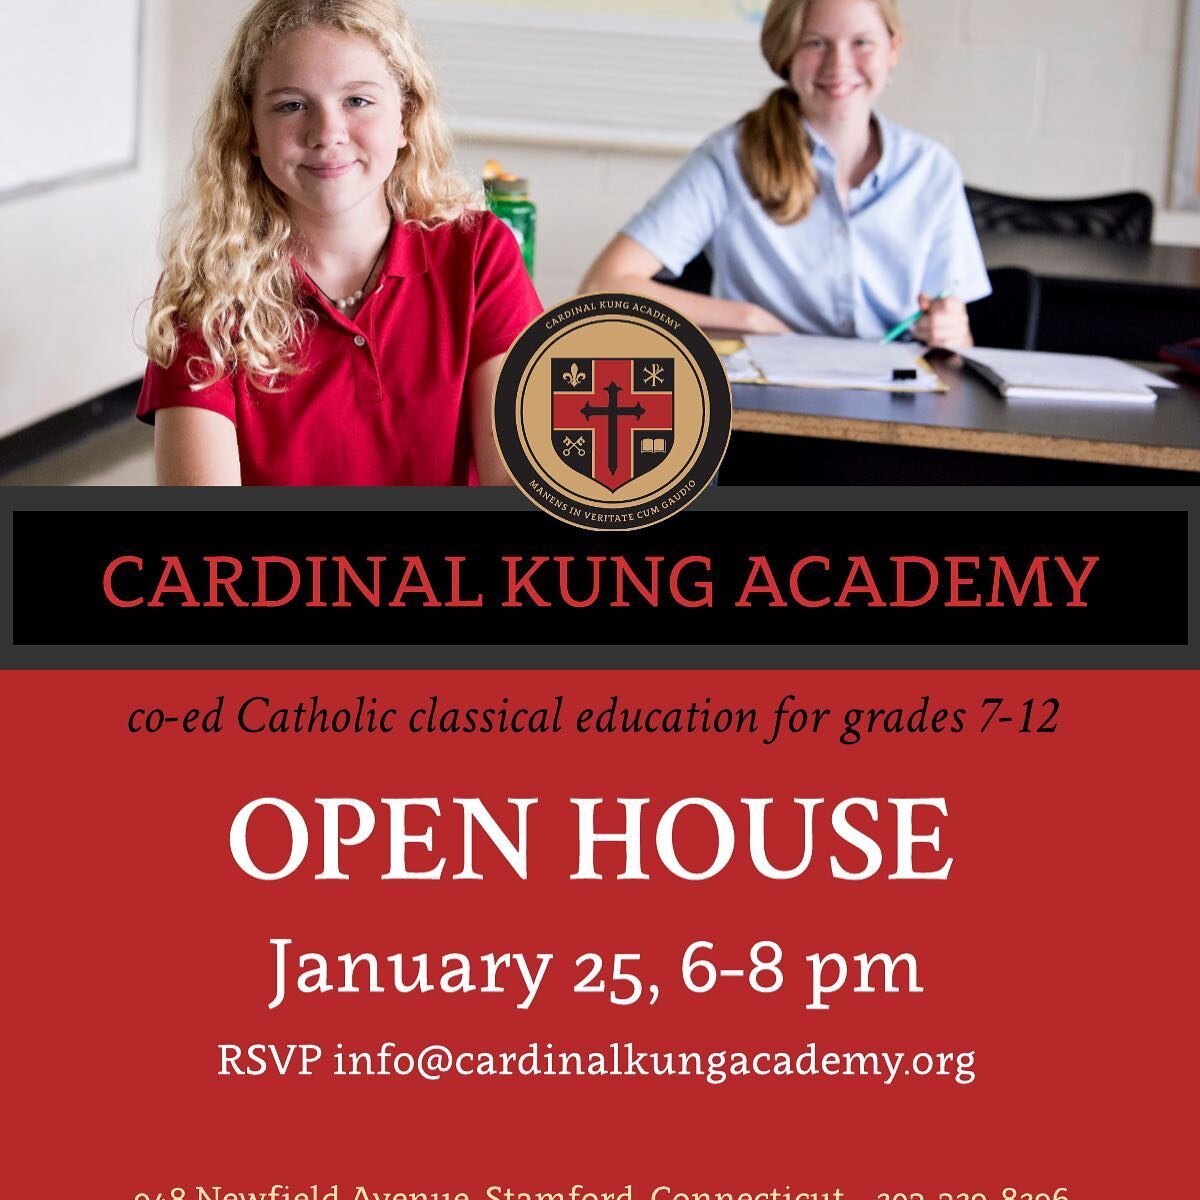 Catholic Schools Week is coming up- join us at our Open House: January 25, 6-8 pm.